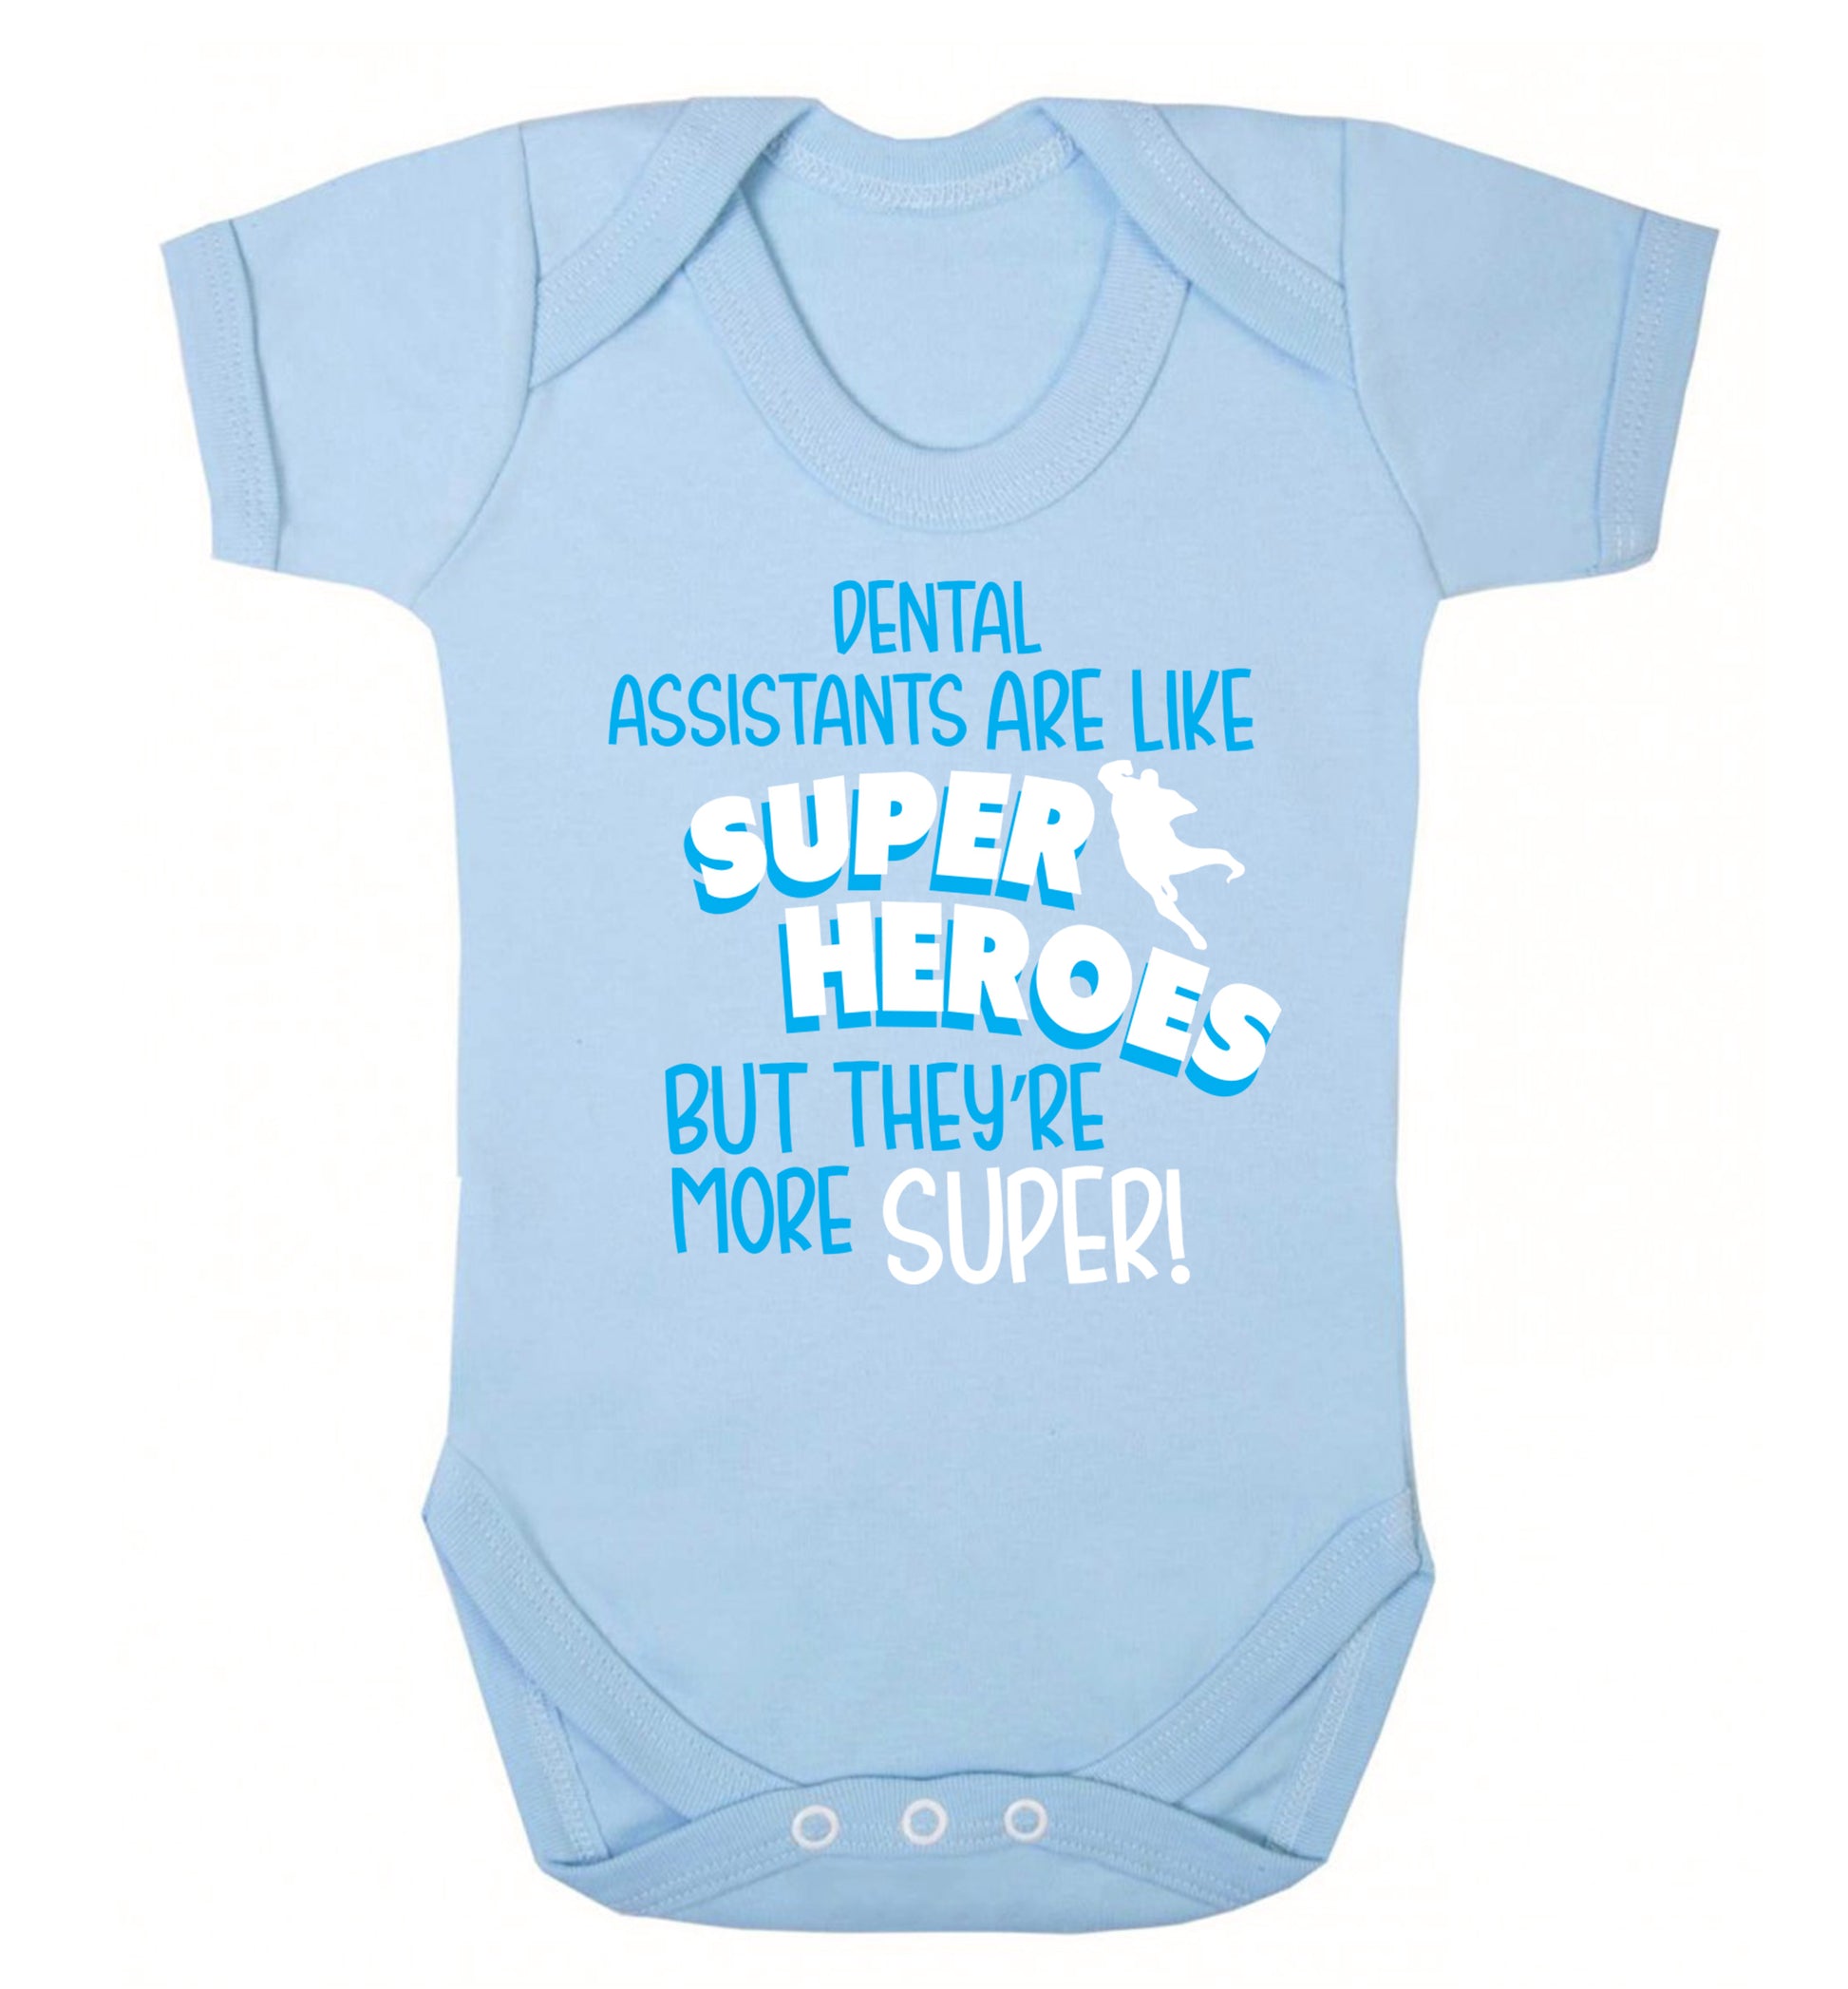 Dental Assistants are like superheros but they're more super Baby Vest pale blue 18-24 months